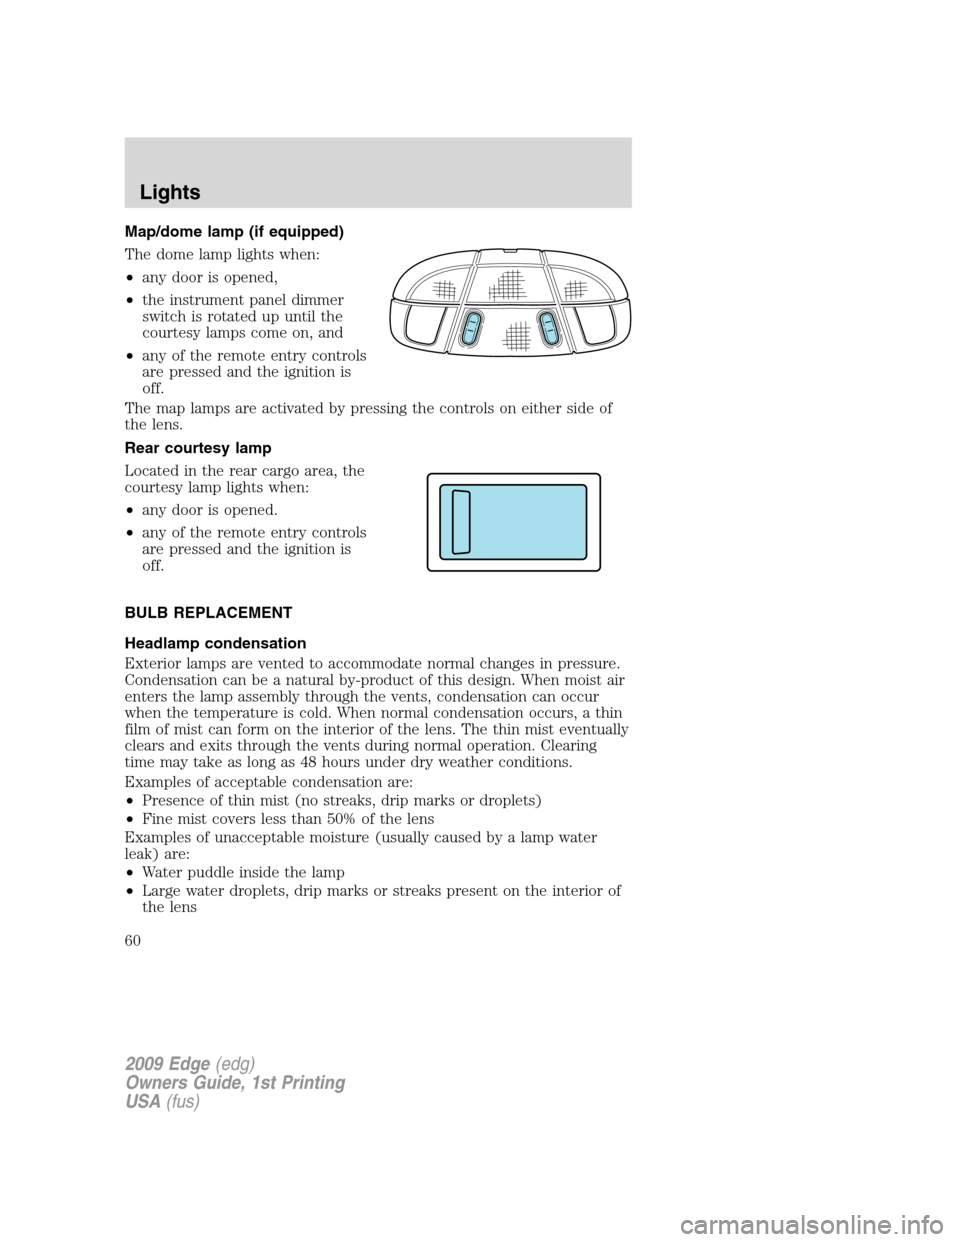 FORD EDGE 2009 1.G Owners Manual Map/dome lamp (if equipped)
The dome lamp lights when:
•any door is opened,
•the instrument panel dimmer
switch is rotated up until the
courtesy lamps come on, and
•any of the remote entry contr